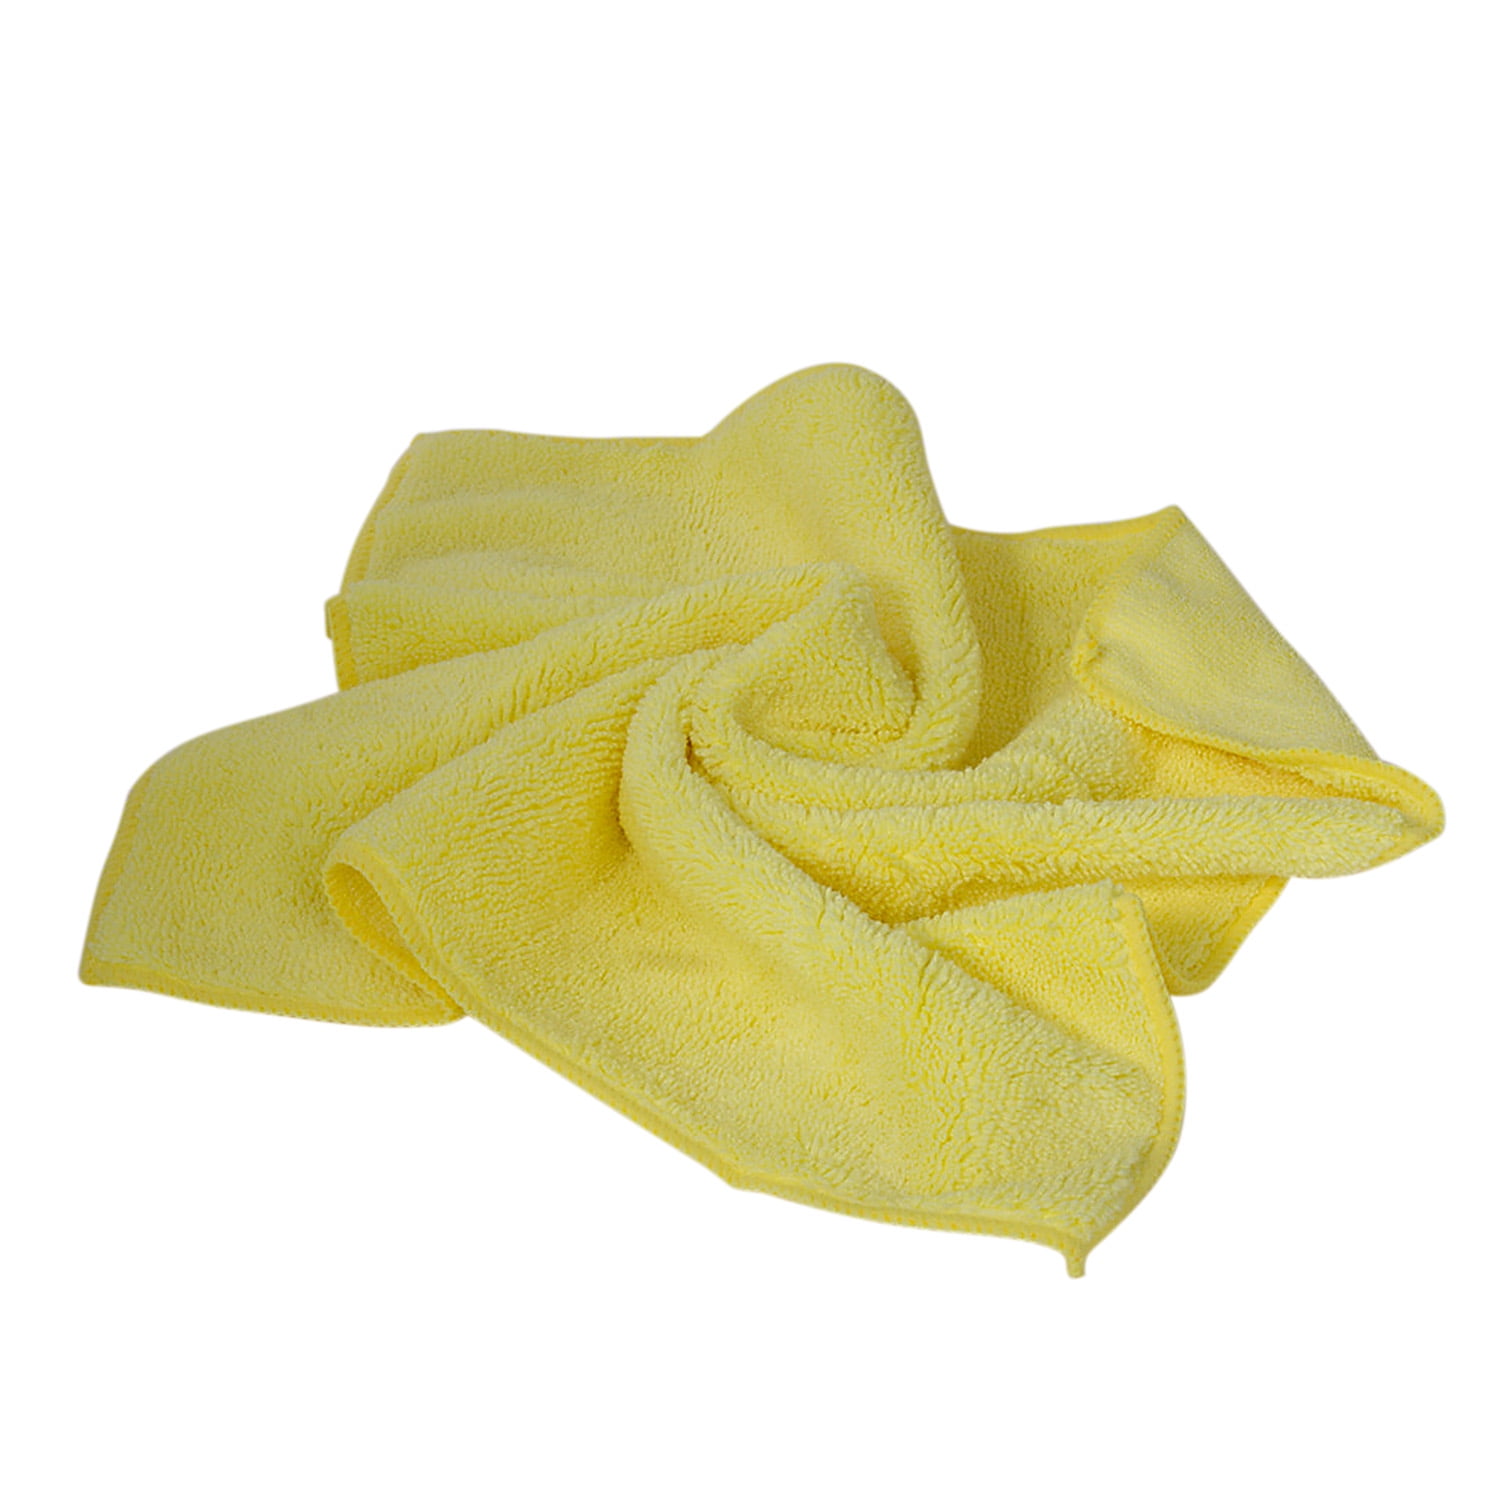 Details about   Auto Car Microfiber Cleaning Cloth Towel Rag Polishing No Scratch Detailing 